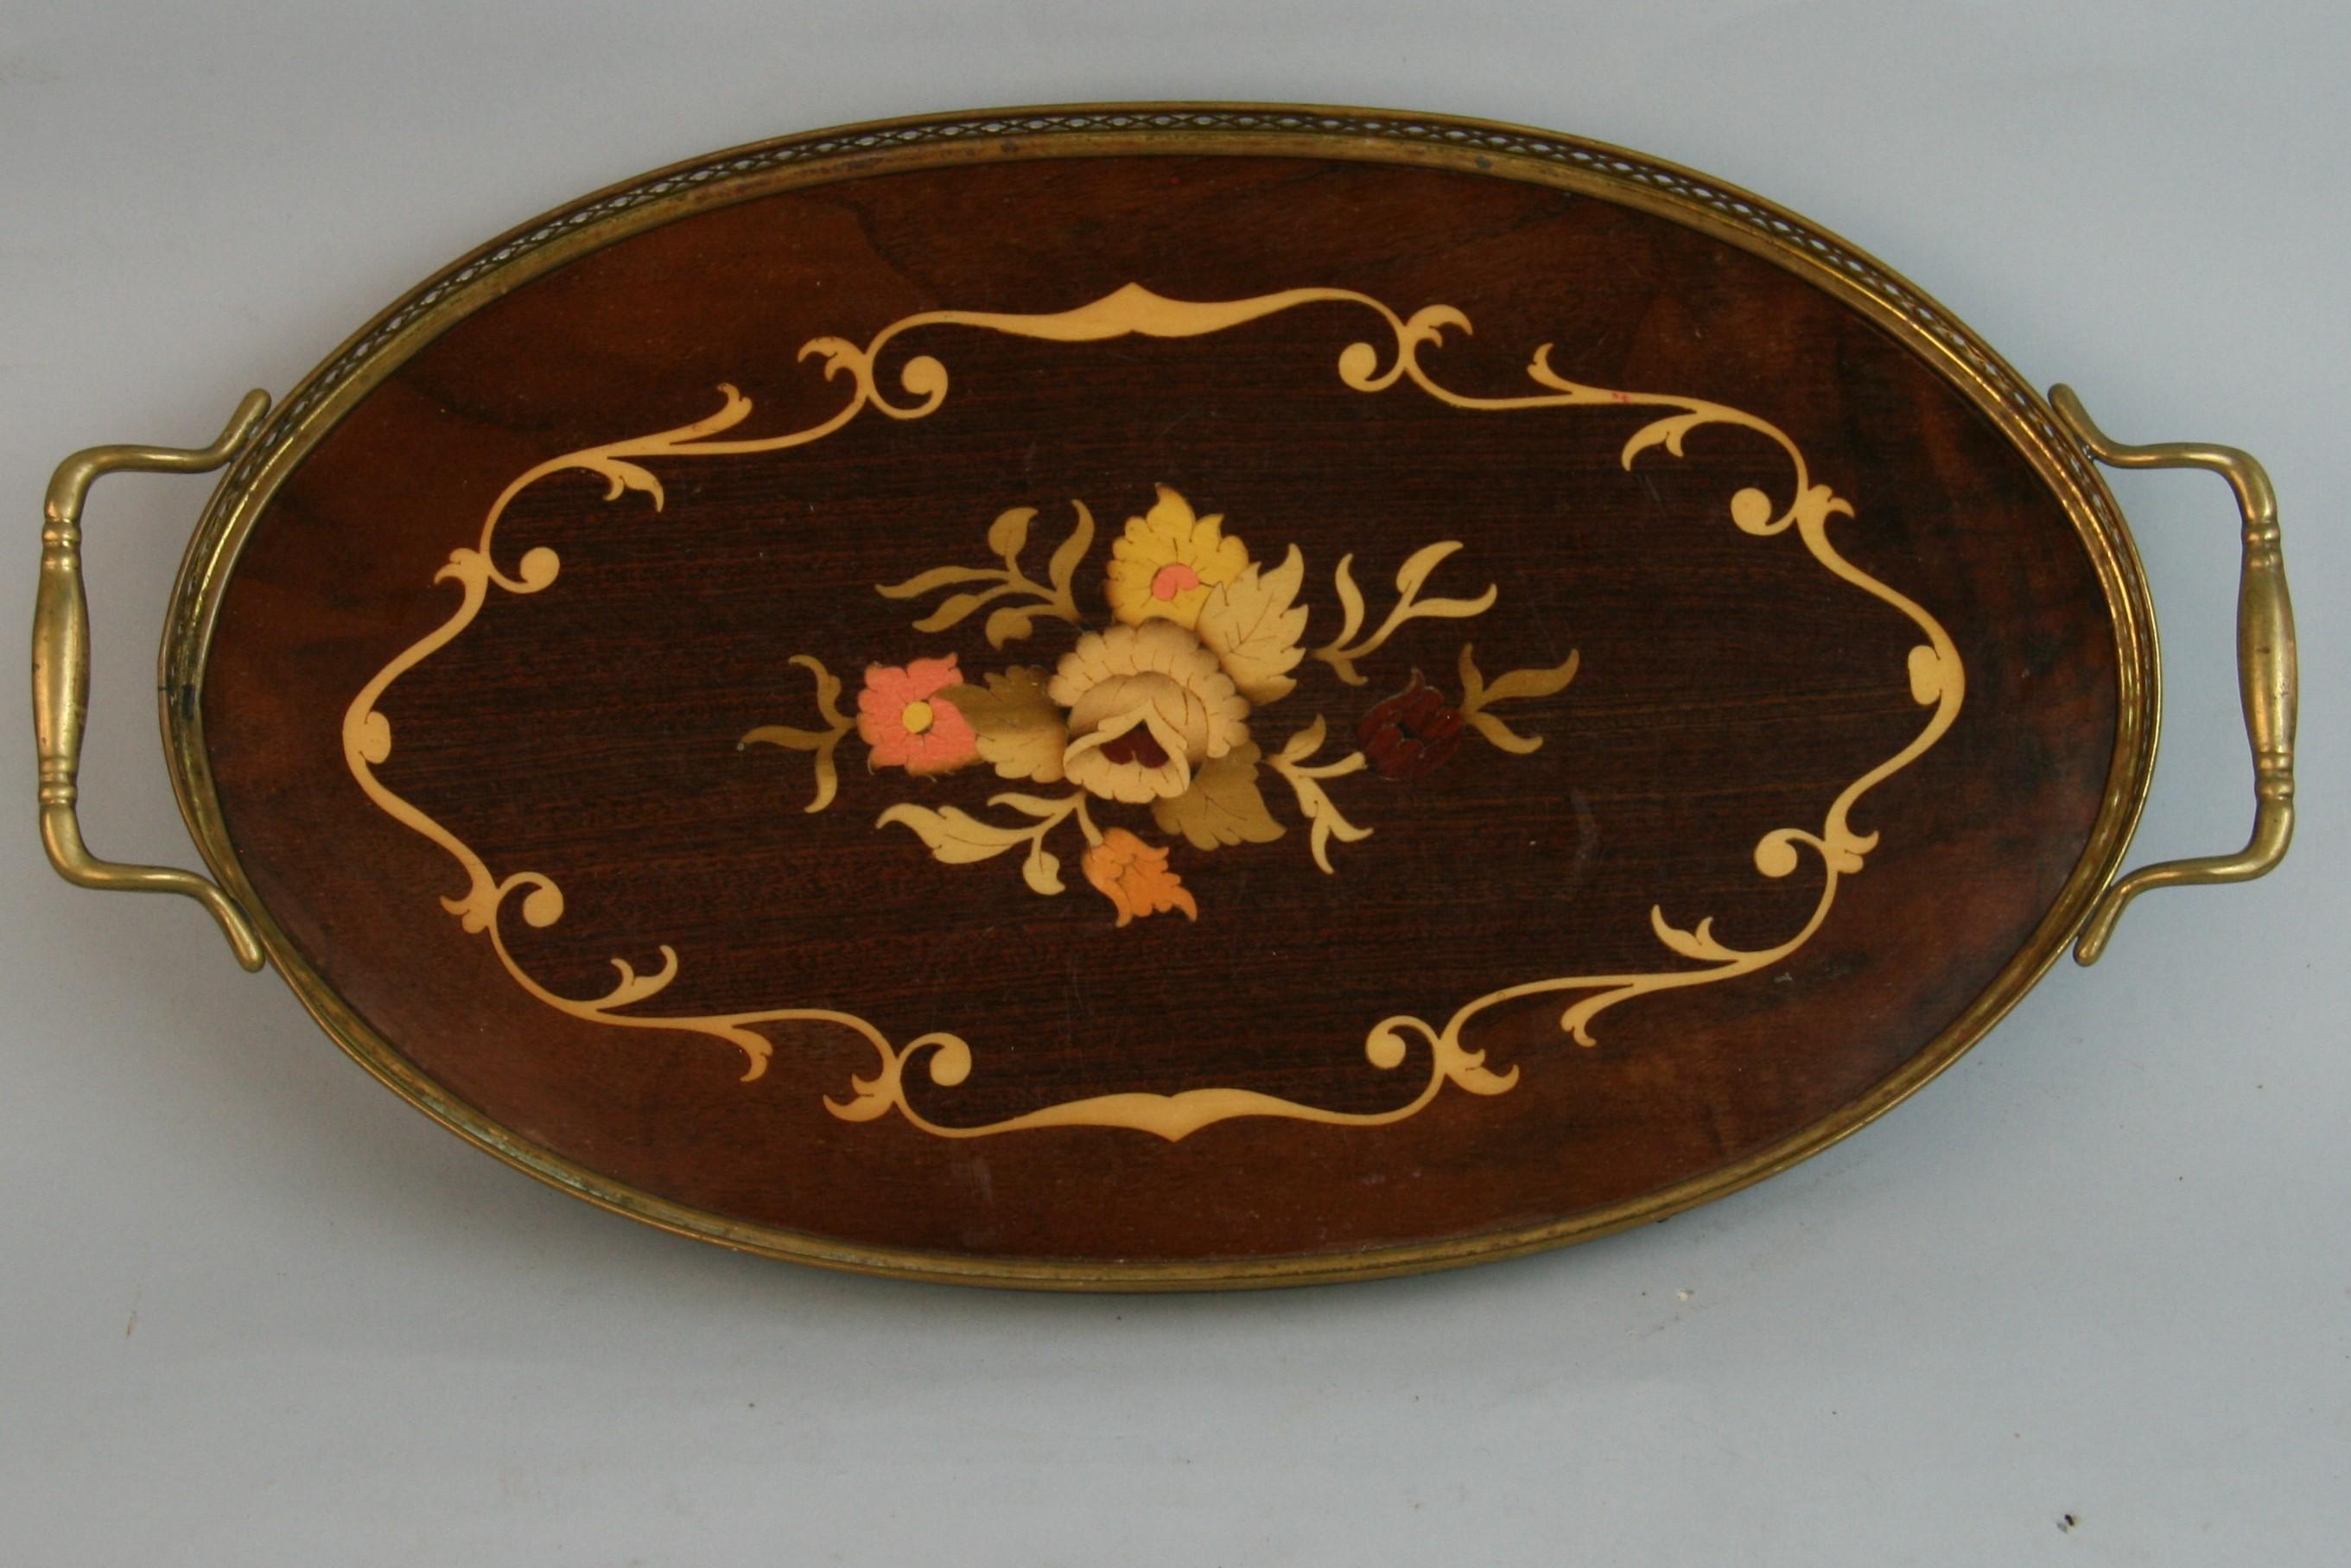 1338 Italian inlaid wood serving tray with protective coating with brass filigree rim and handles.